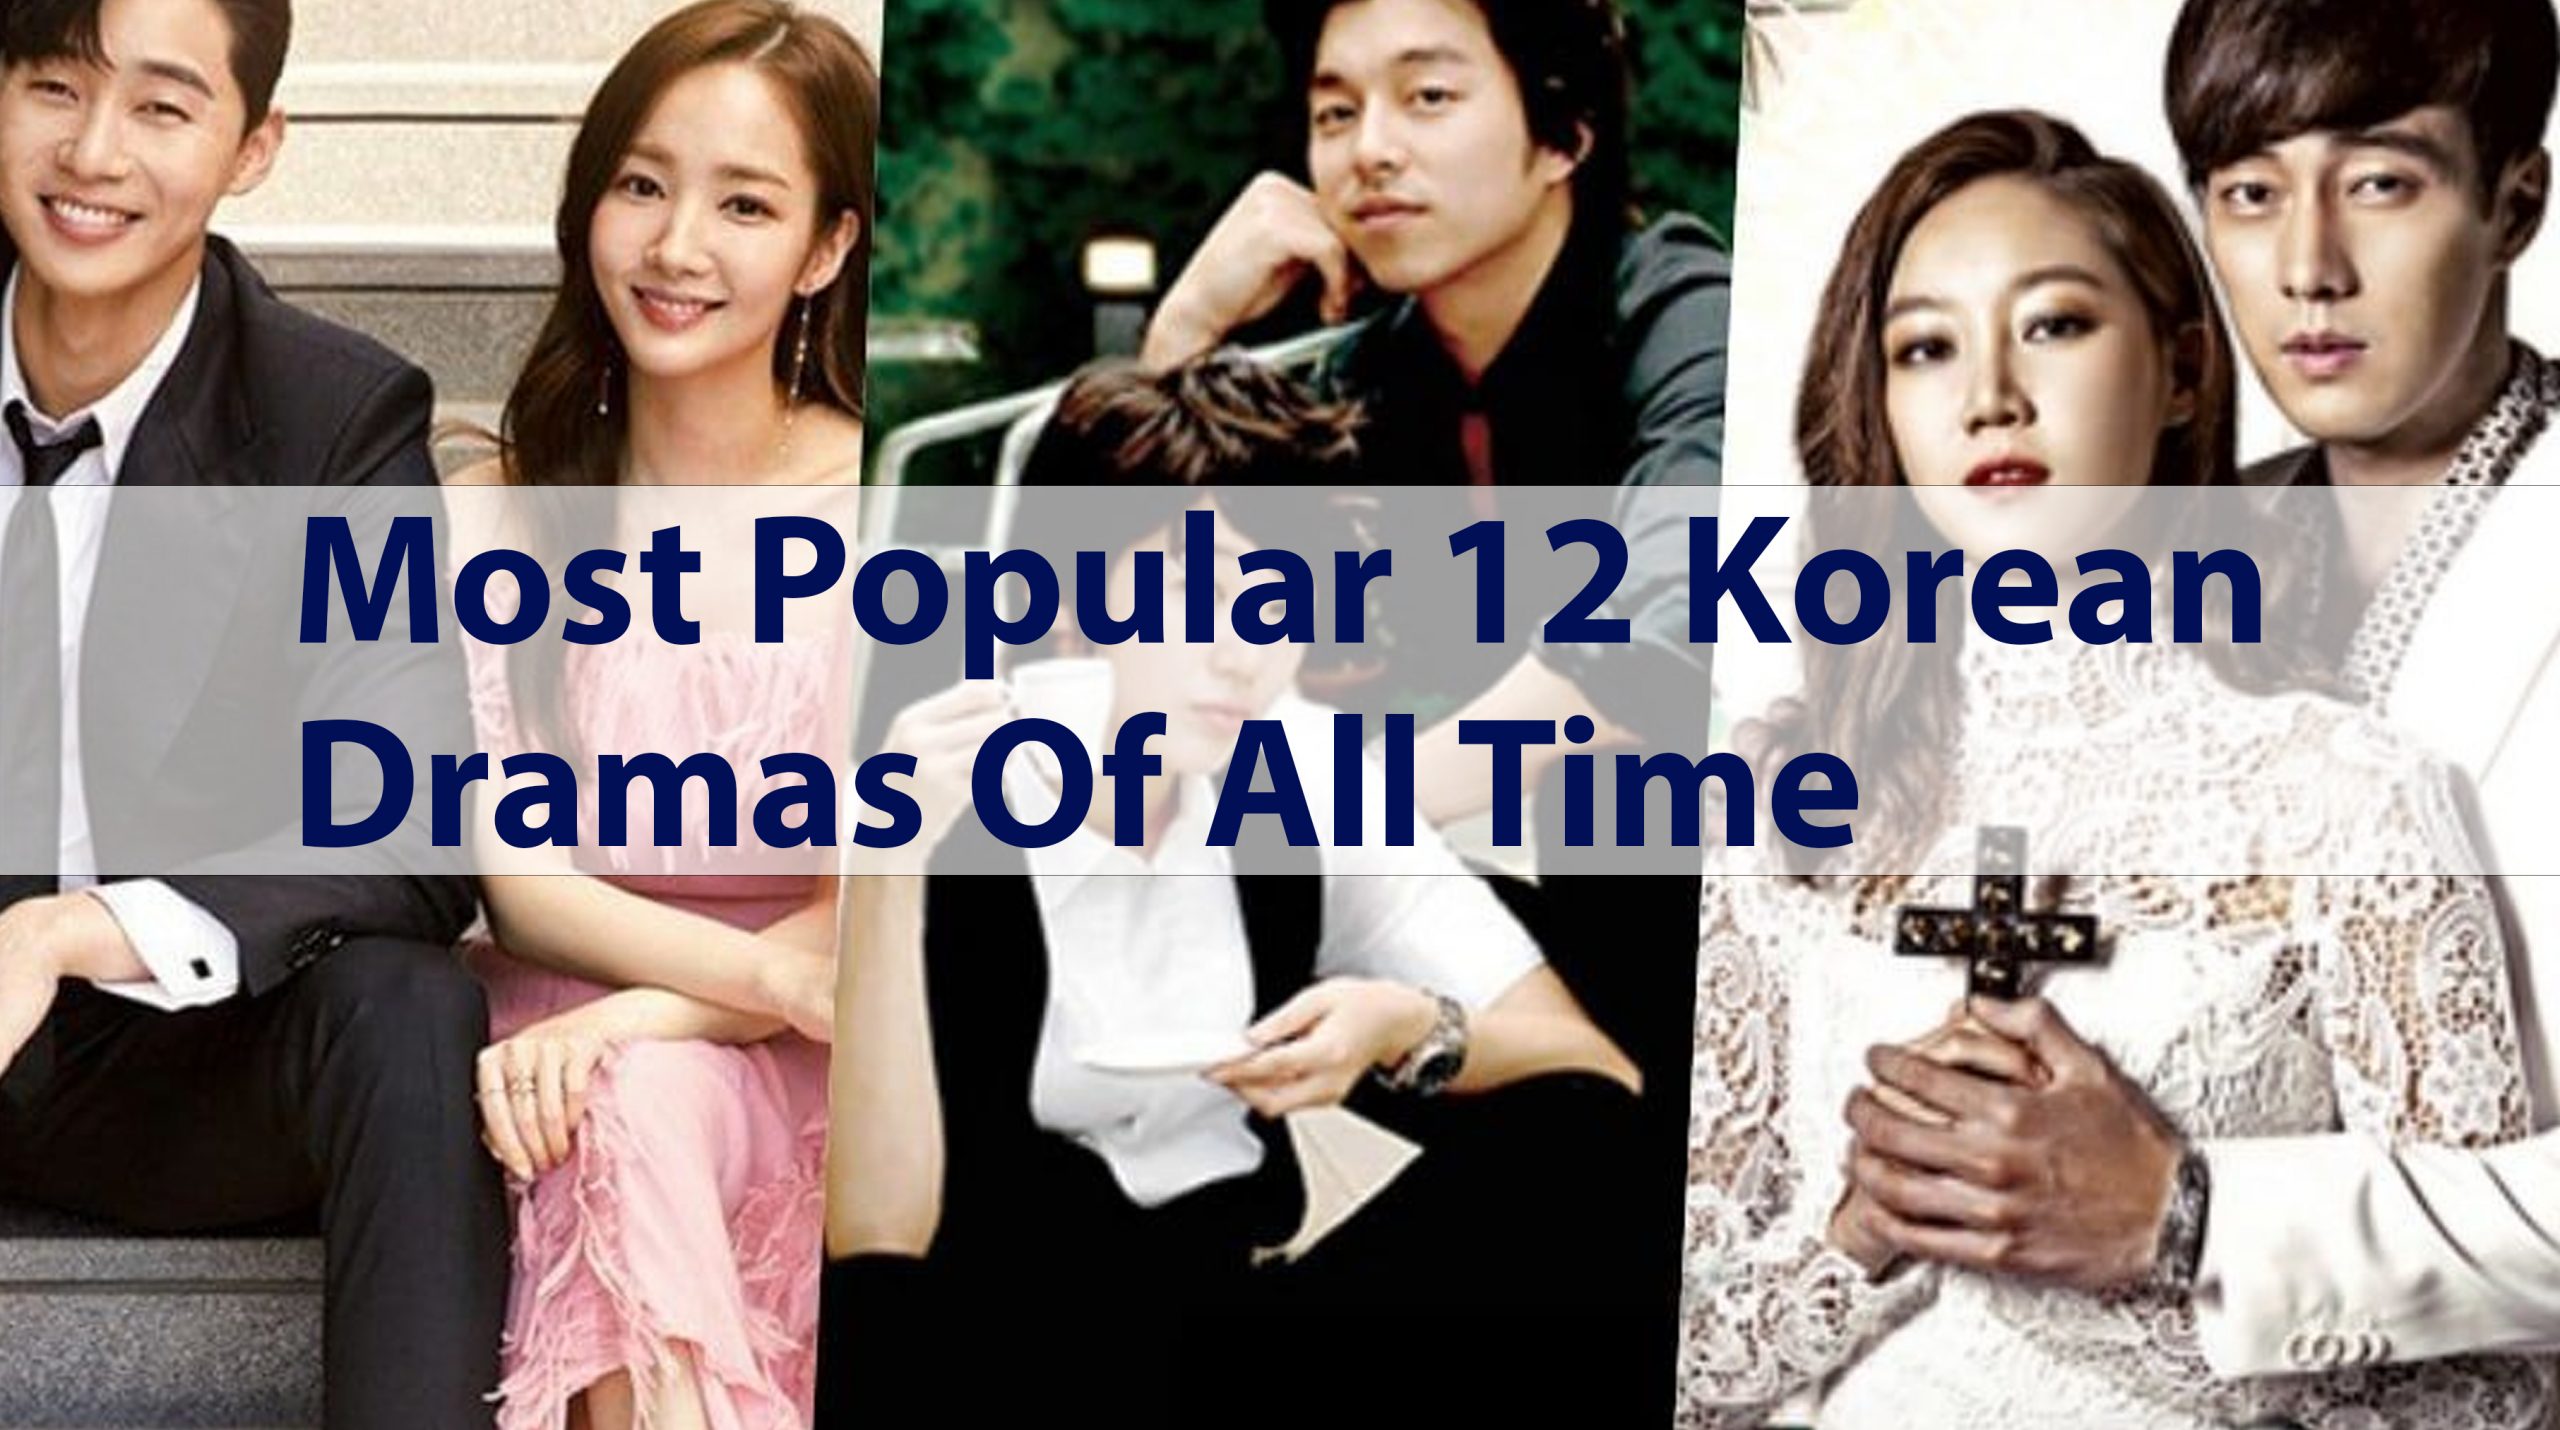 Most Popular 12 Korean Dramas Of All Time- You Should Watch